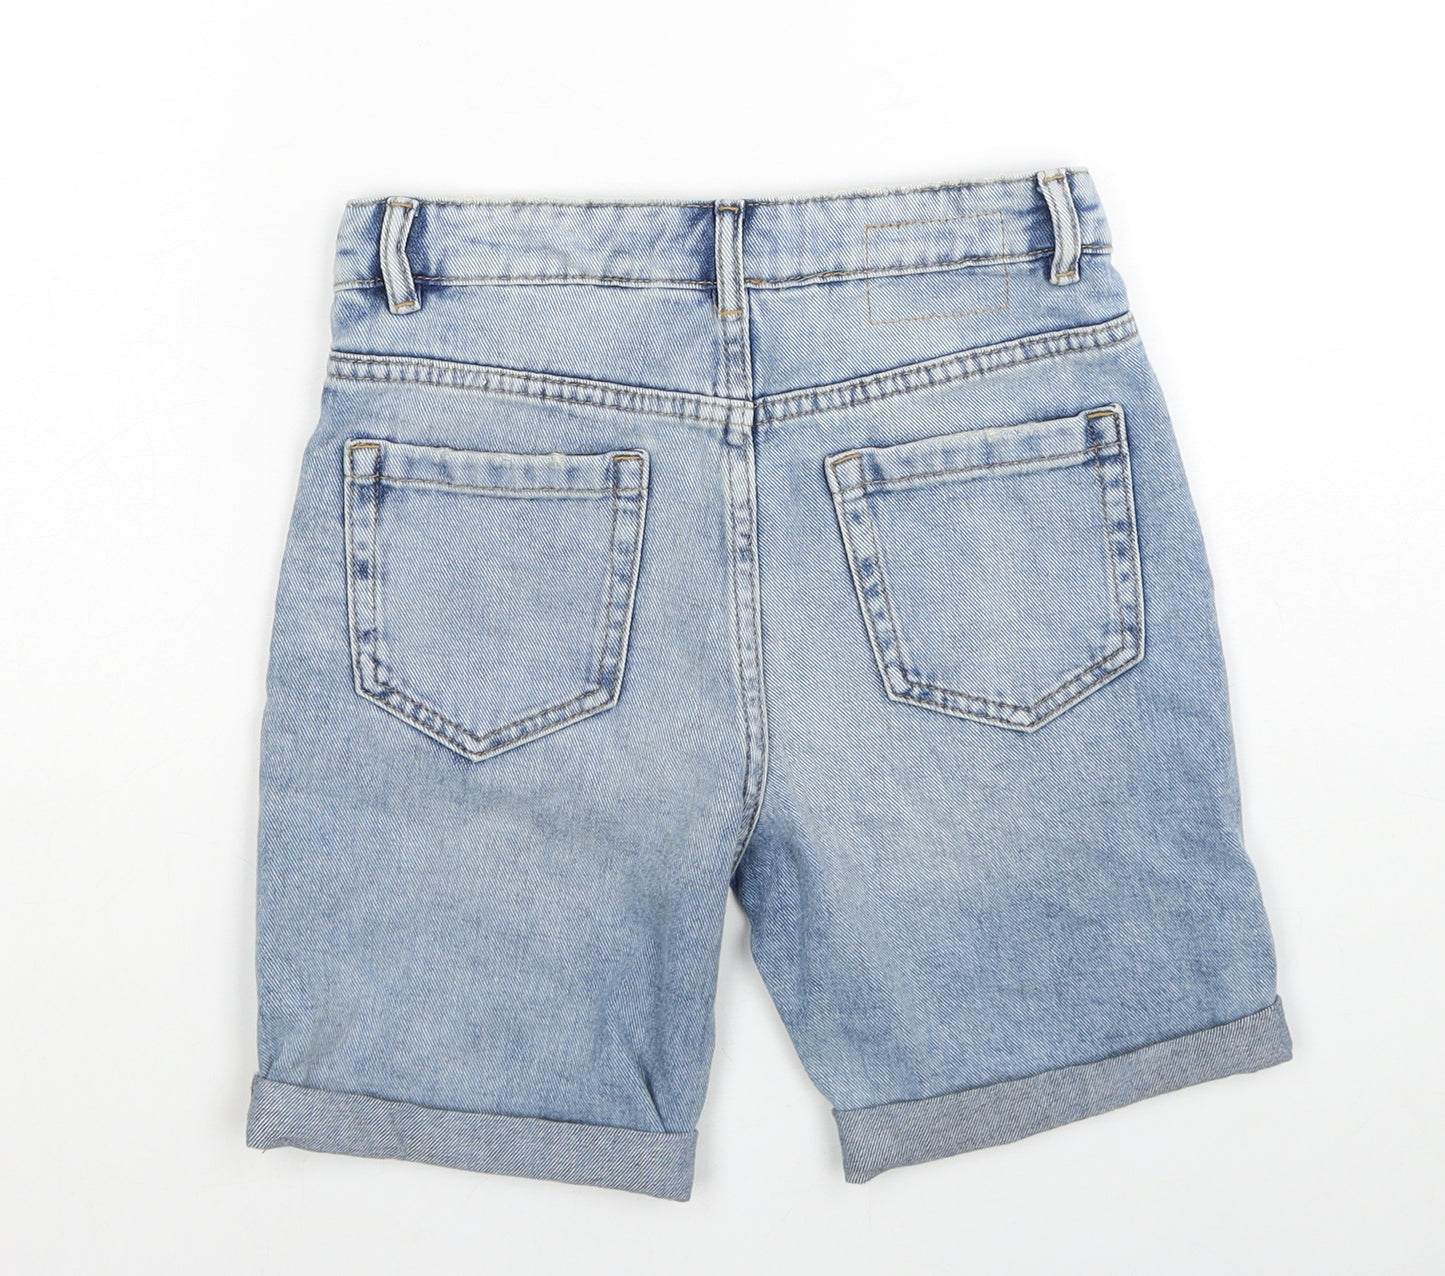 Marks and Spencer Boys Blue Cotton Bermuda Shorts Size 7-8 Years Regular Zip